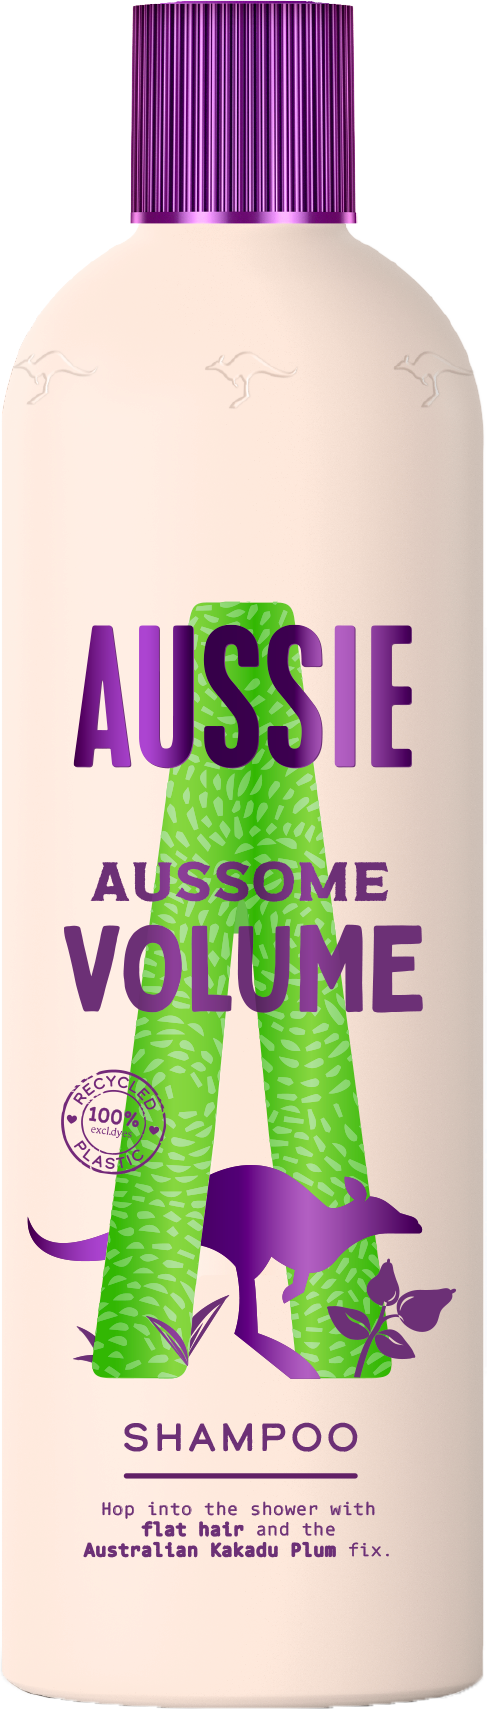 A picture of Aussome Volume shampoo Bottle